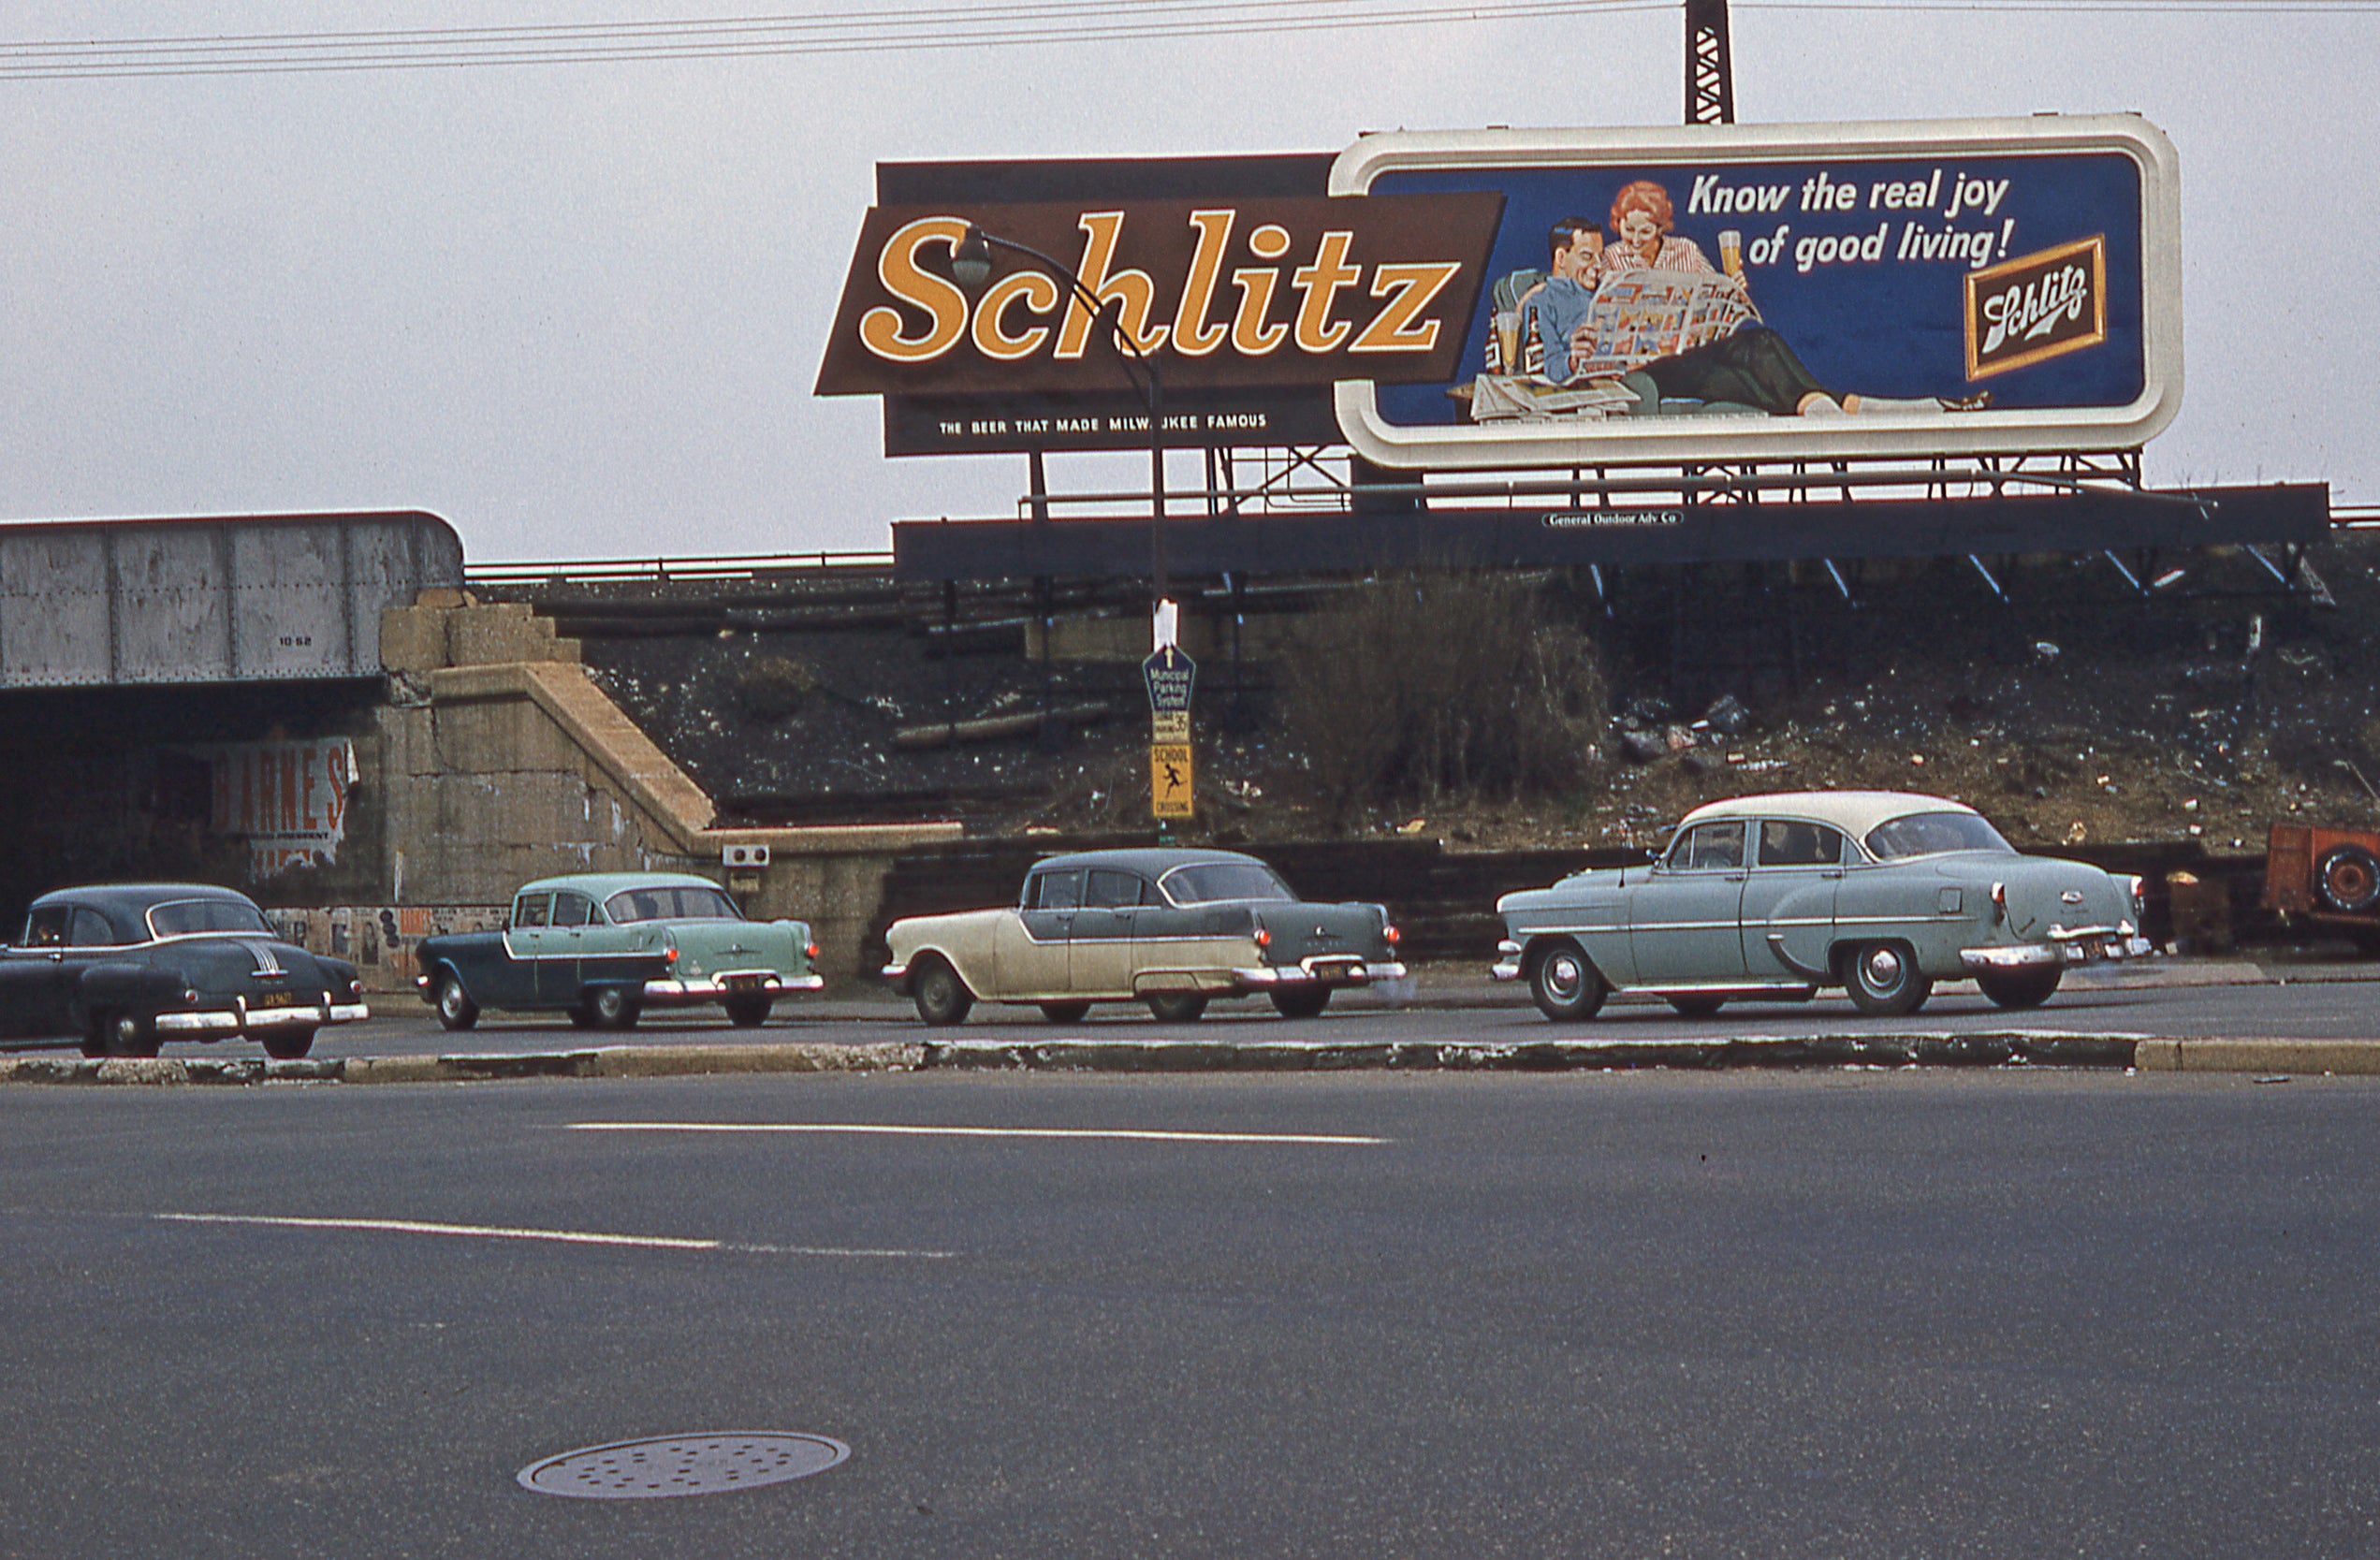 A Schlitz billboard sign above a highway in the 70s